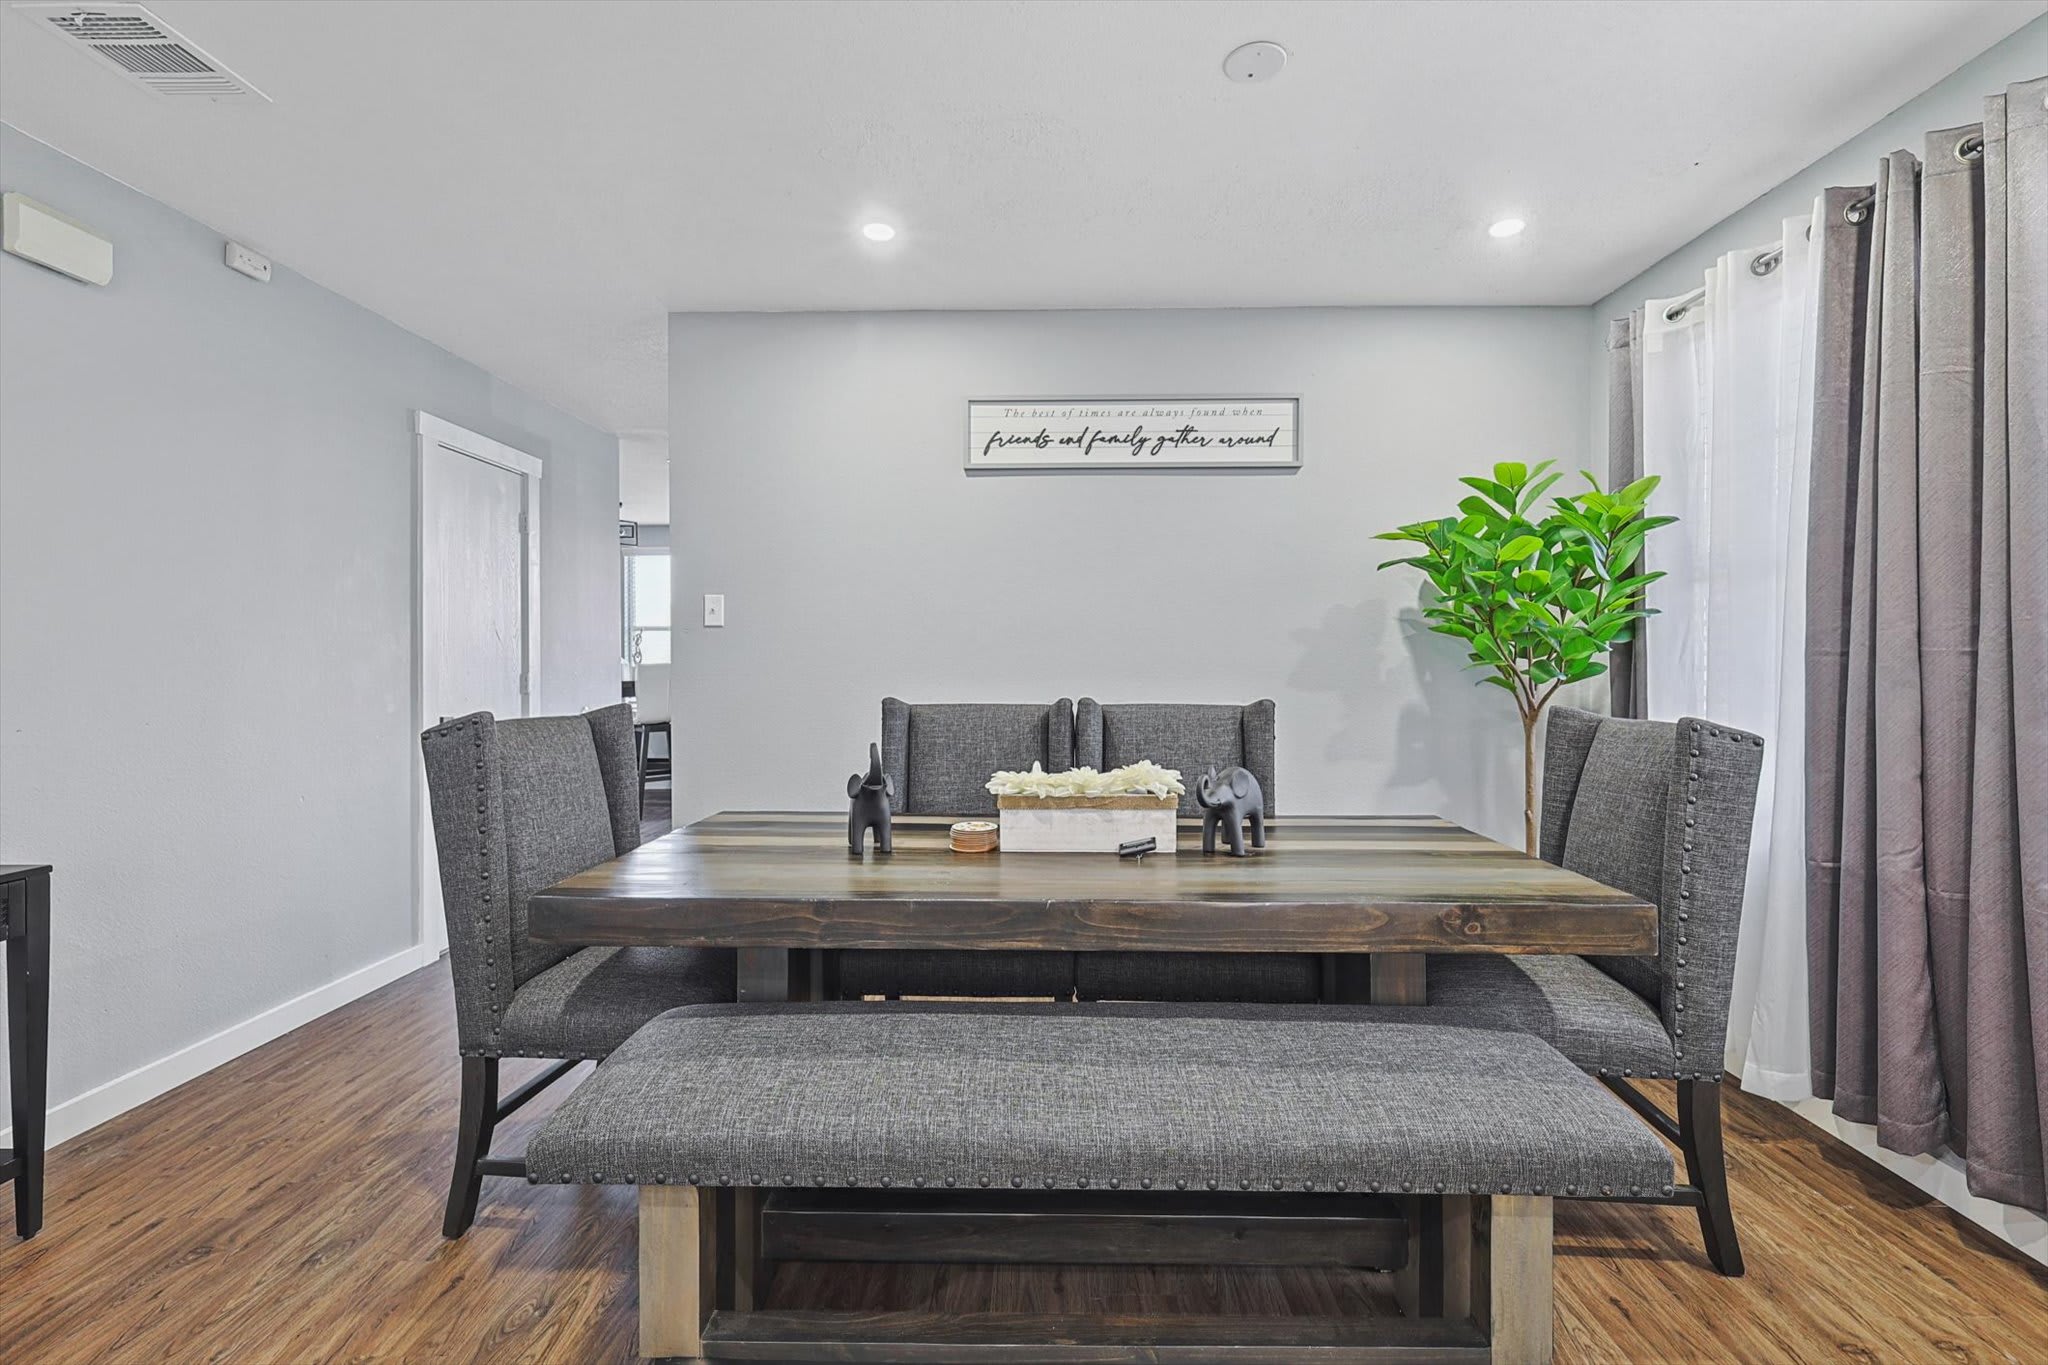 Gather around with friends and family at this stylish dinner table. The decor and furnishings offer you a restaurant-like environment without any of the hassle!